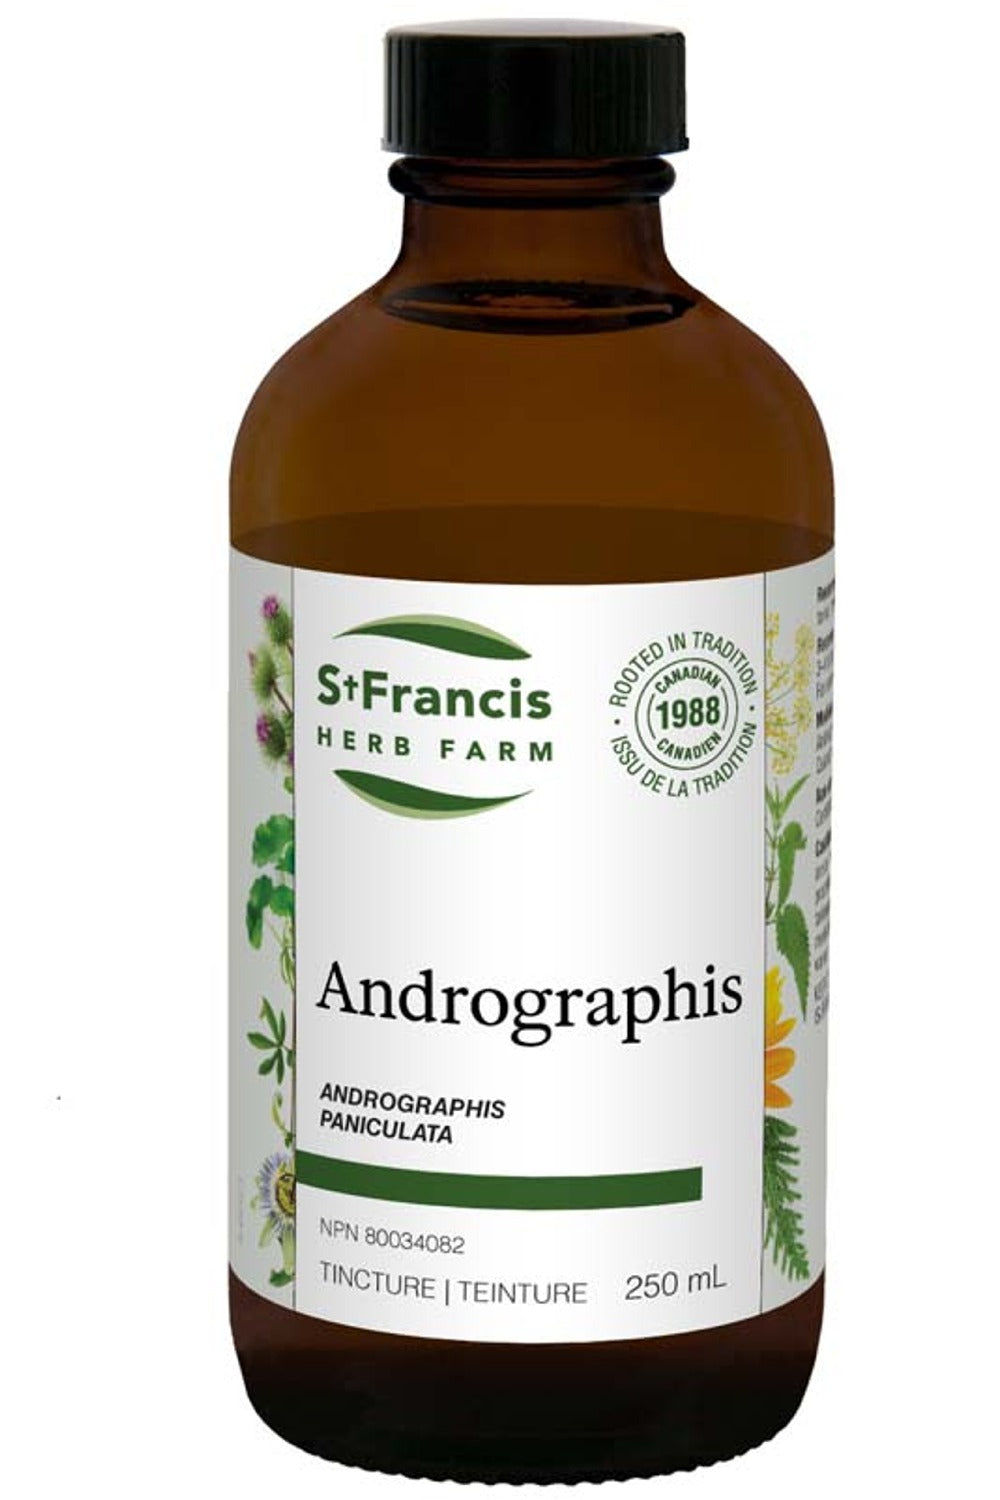 ST FRANCIS HERB FARM Andrographis (250 ml)